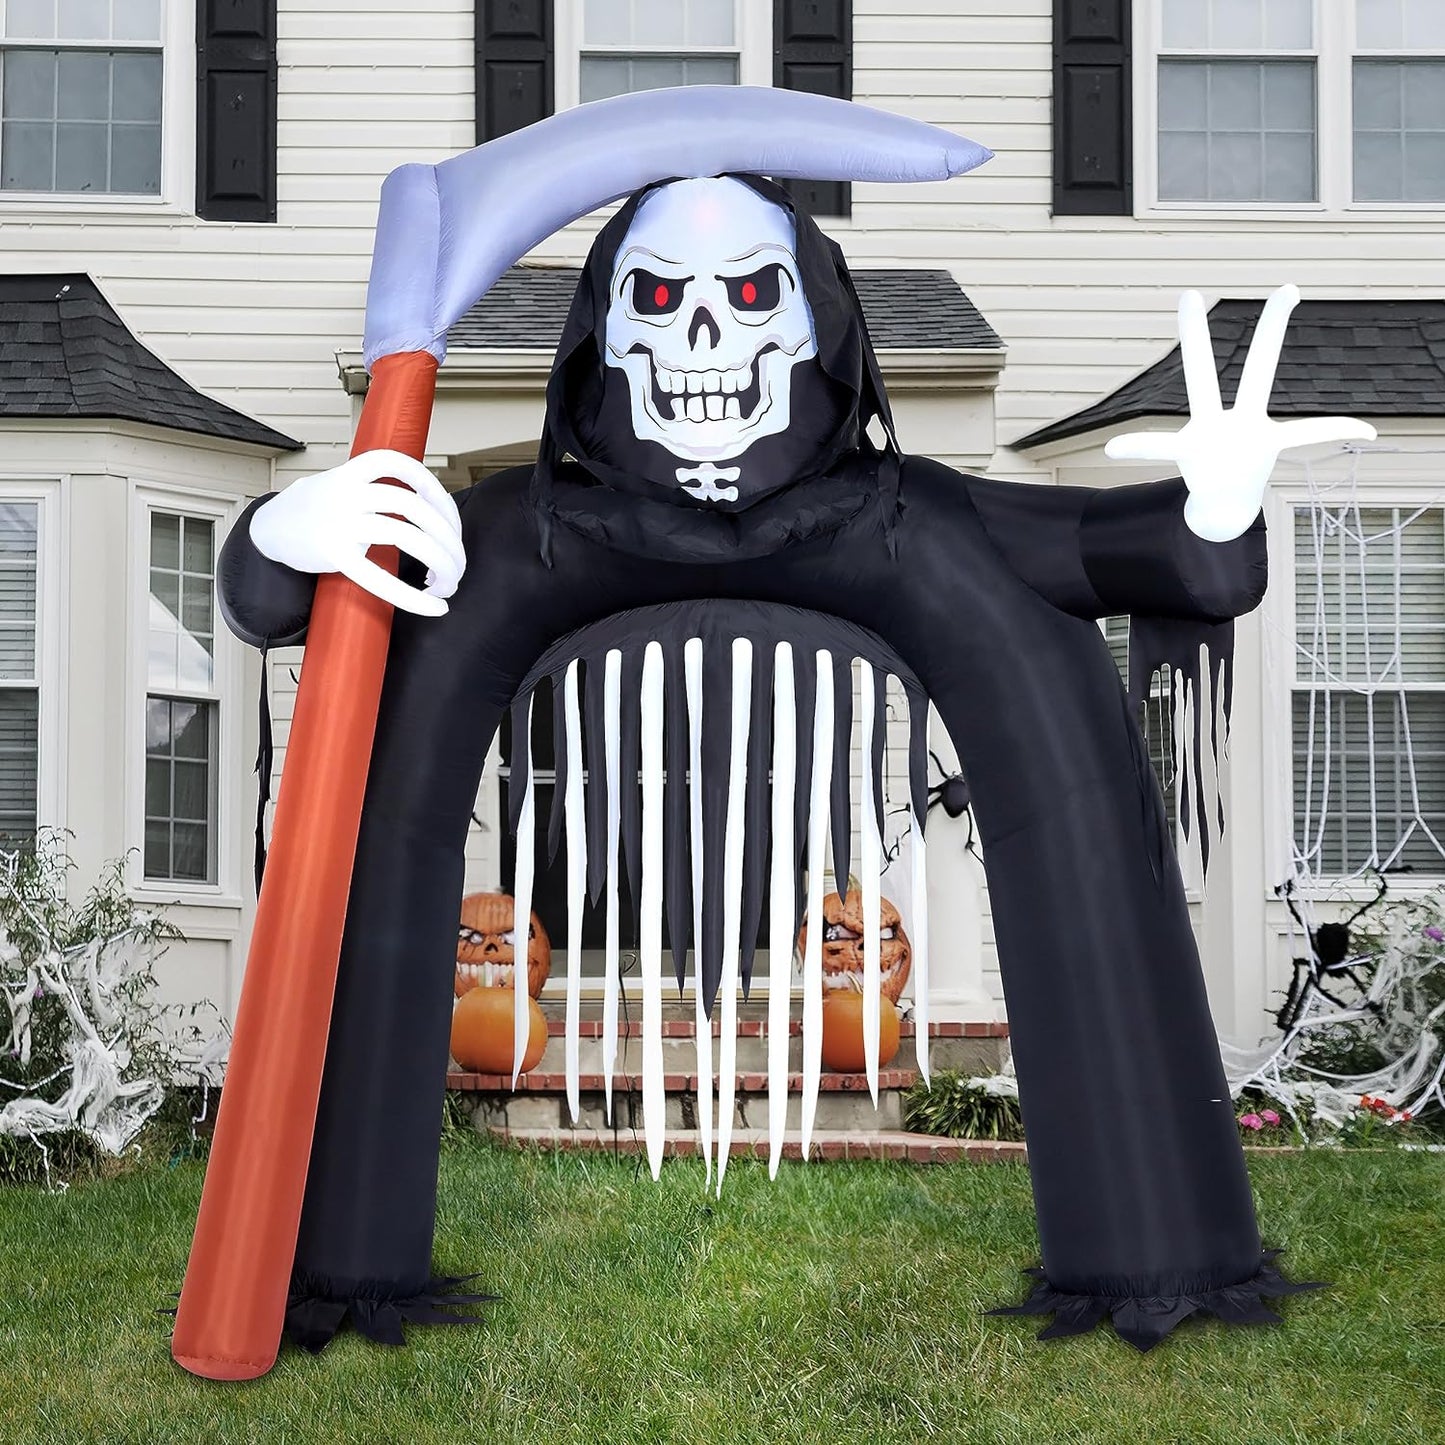 Joiedomi 10.5ft Grim Reaper Archway Halloween Inflatable Decoration